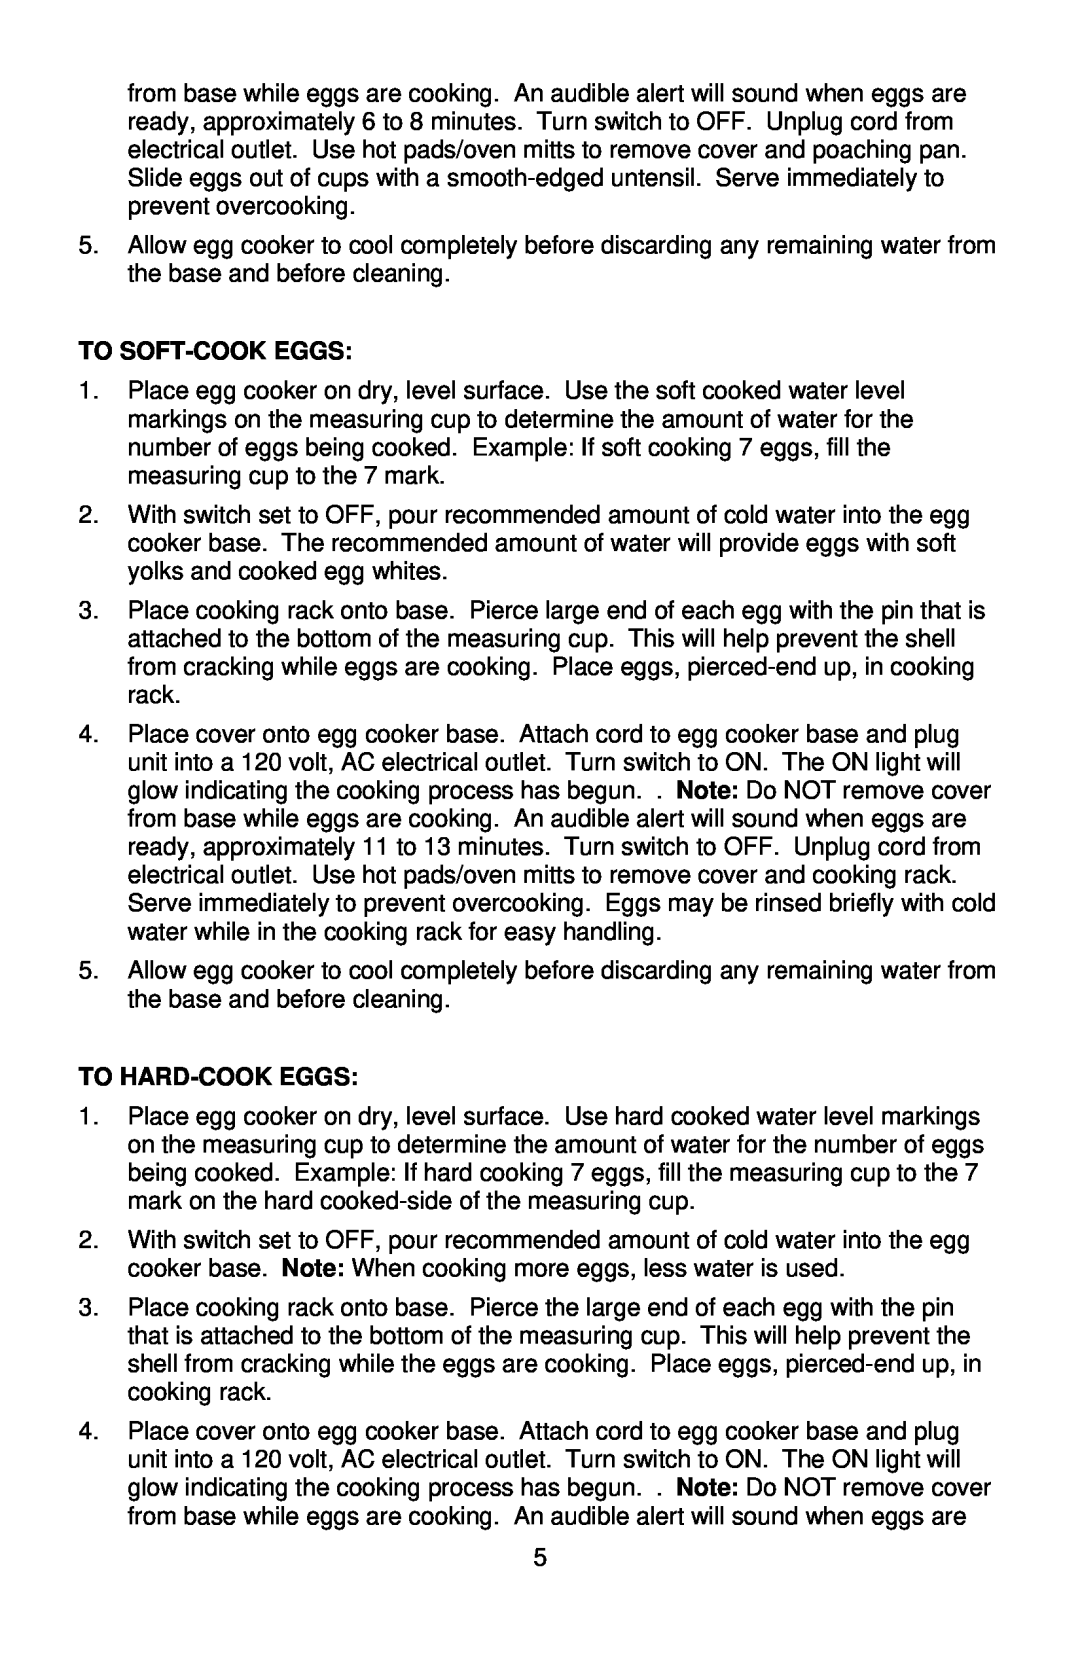 West Bend Automatic Egg Cooker instruction manual To Soft-Cookeggs, To Hard-Cookeggs 